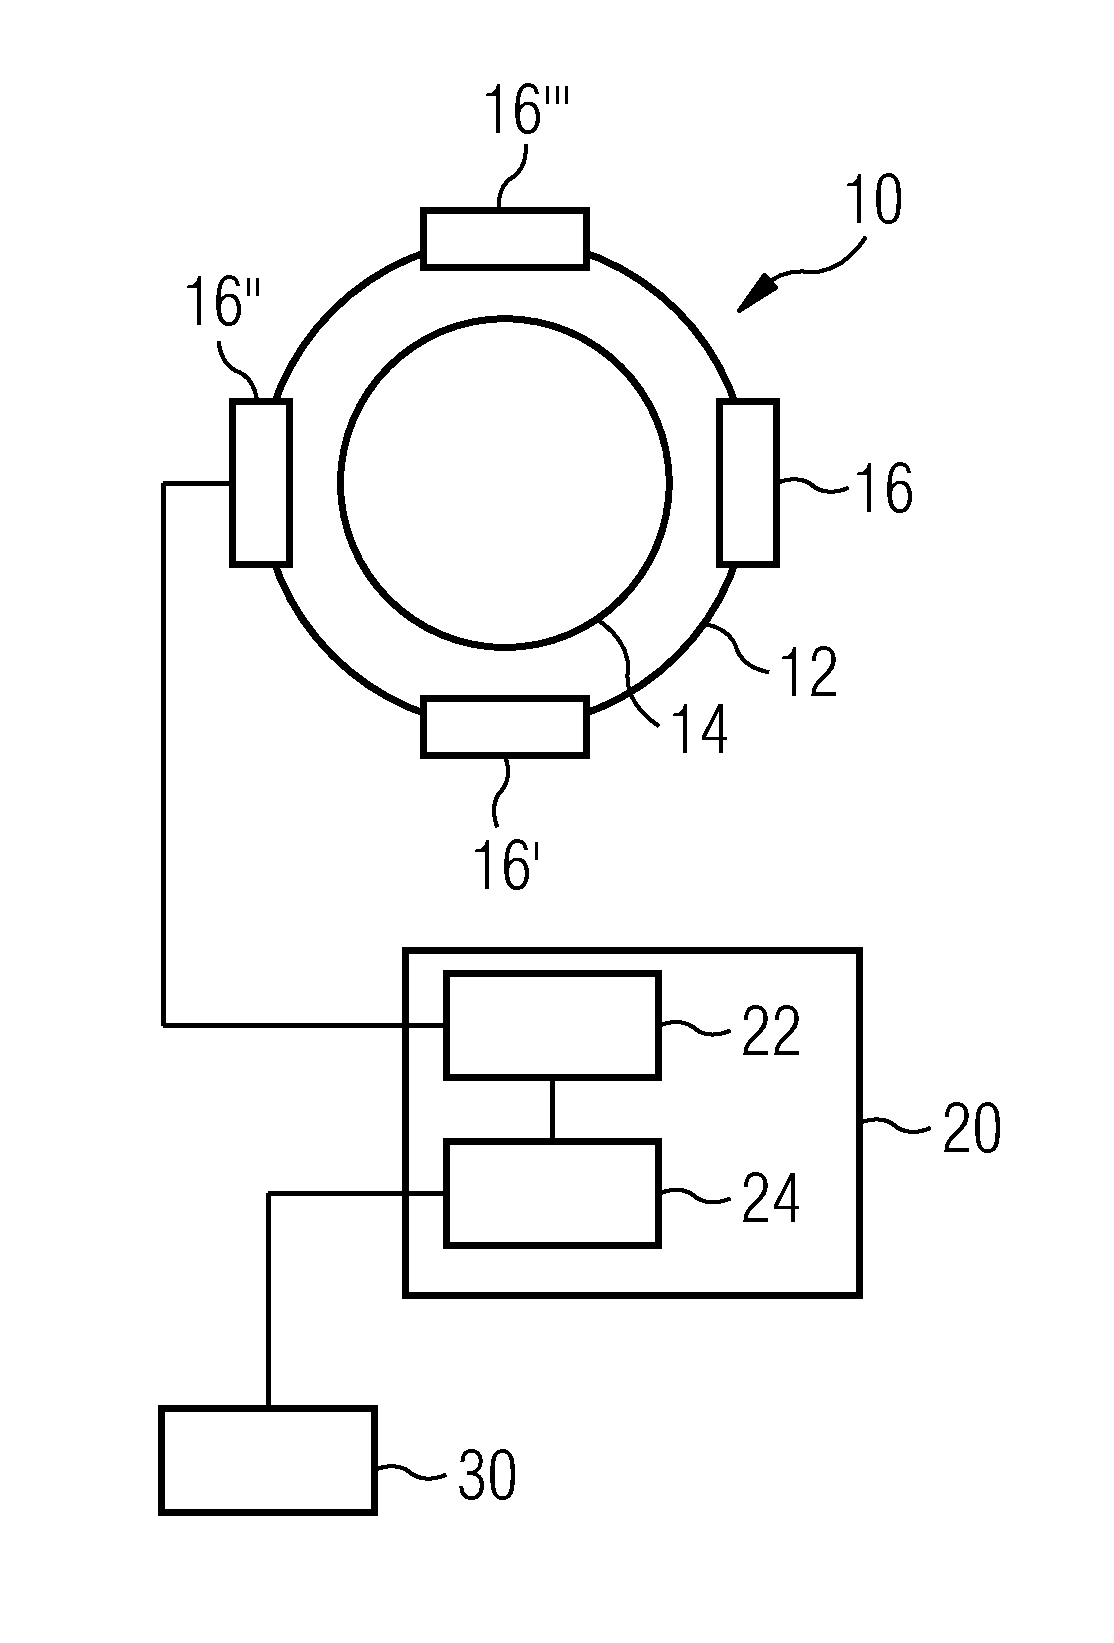 Asynchronous Power Generator for a Wind Turbine